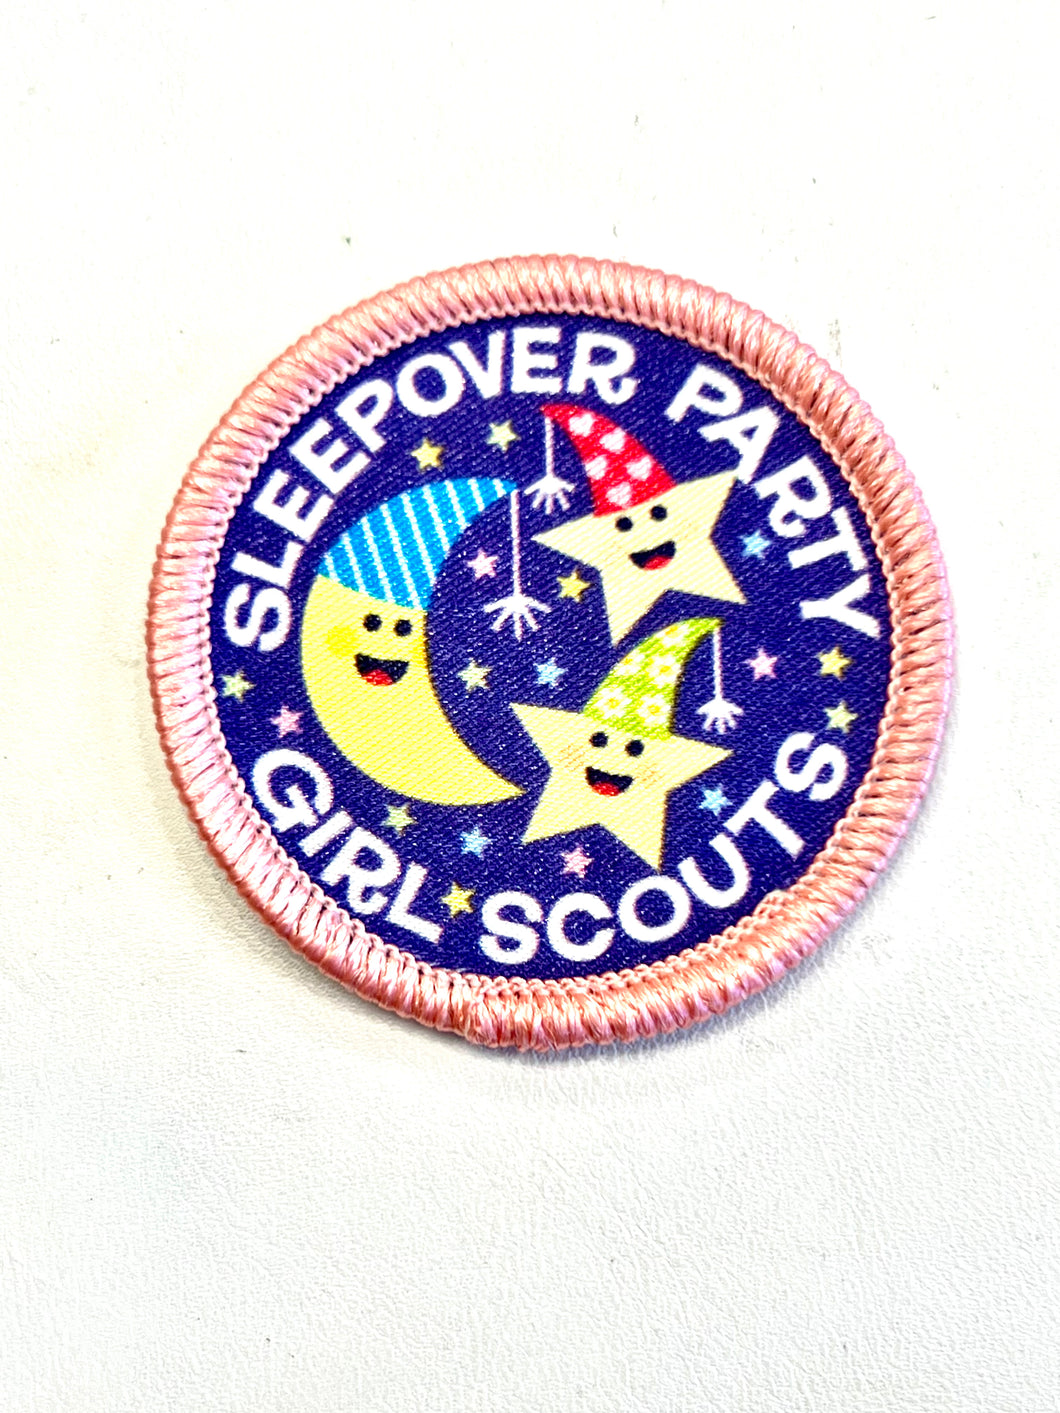 Girl Scouts Sleepover party fun patch